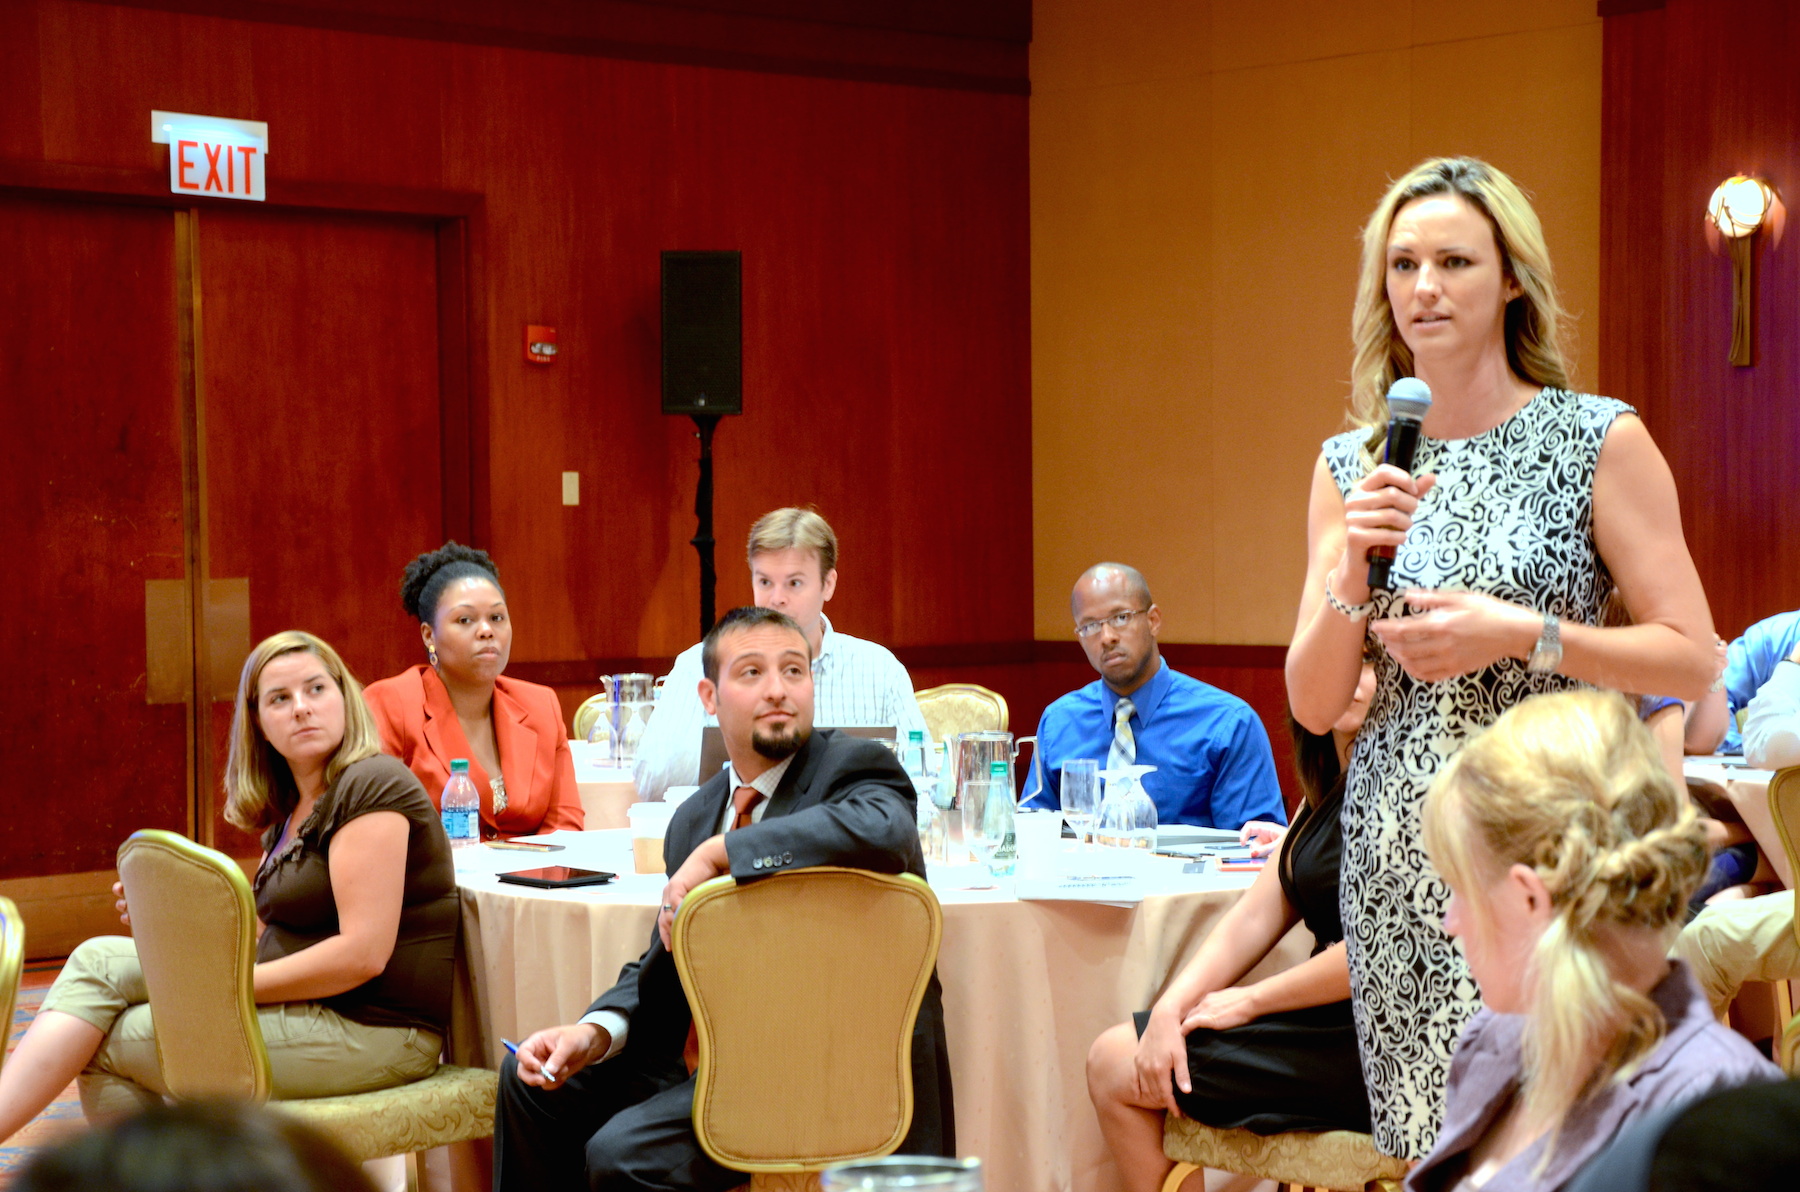 Erin Steele, 2014 Bay East YPN Vice Chair, explains her perspective as an affiliate member of YPN. (Photo by Meg White)